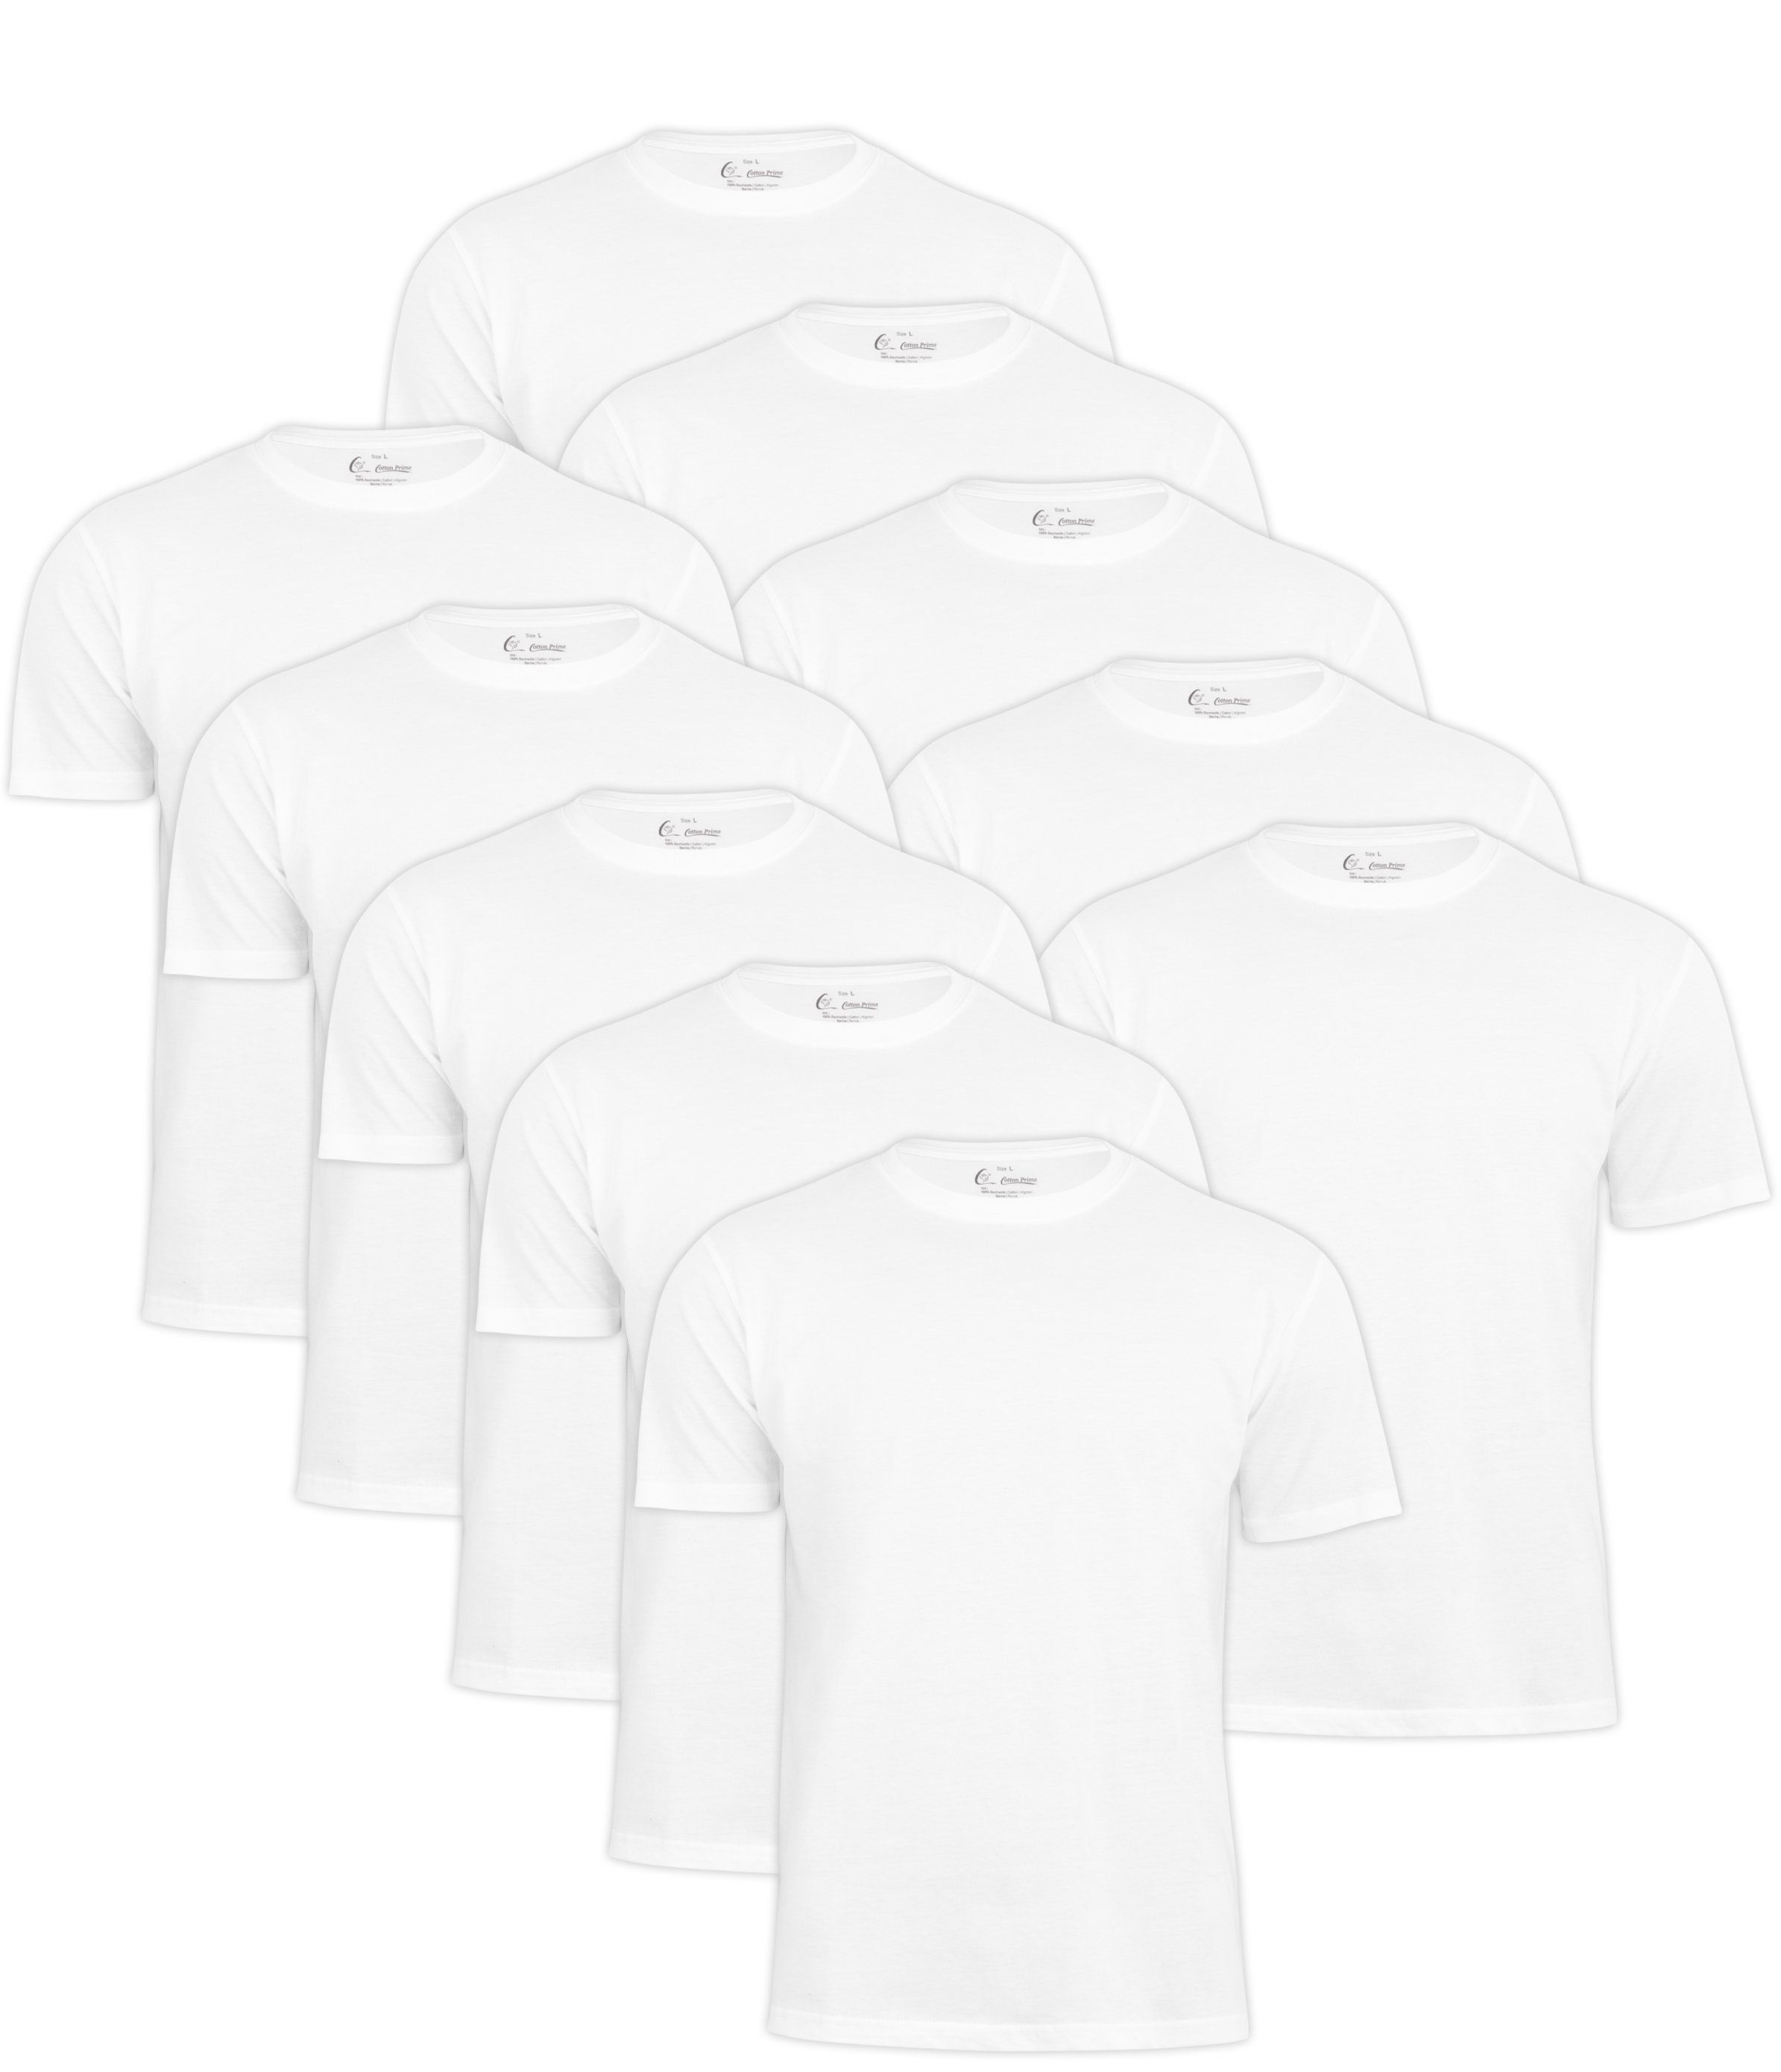 Tee Cotton T-Shirt Weiss Prime® - O-Neck